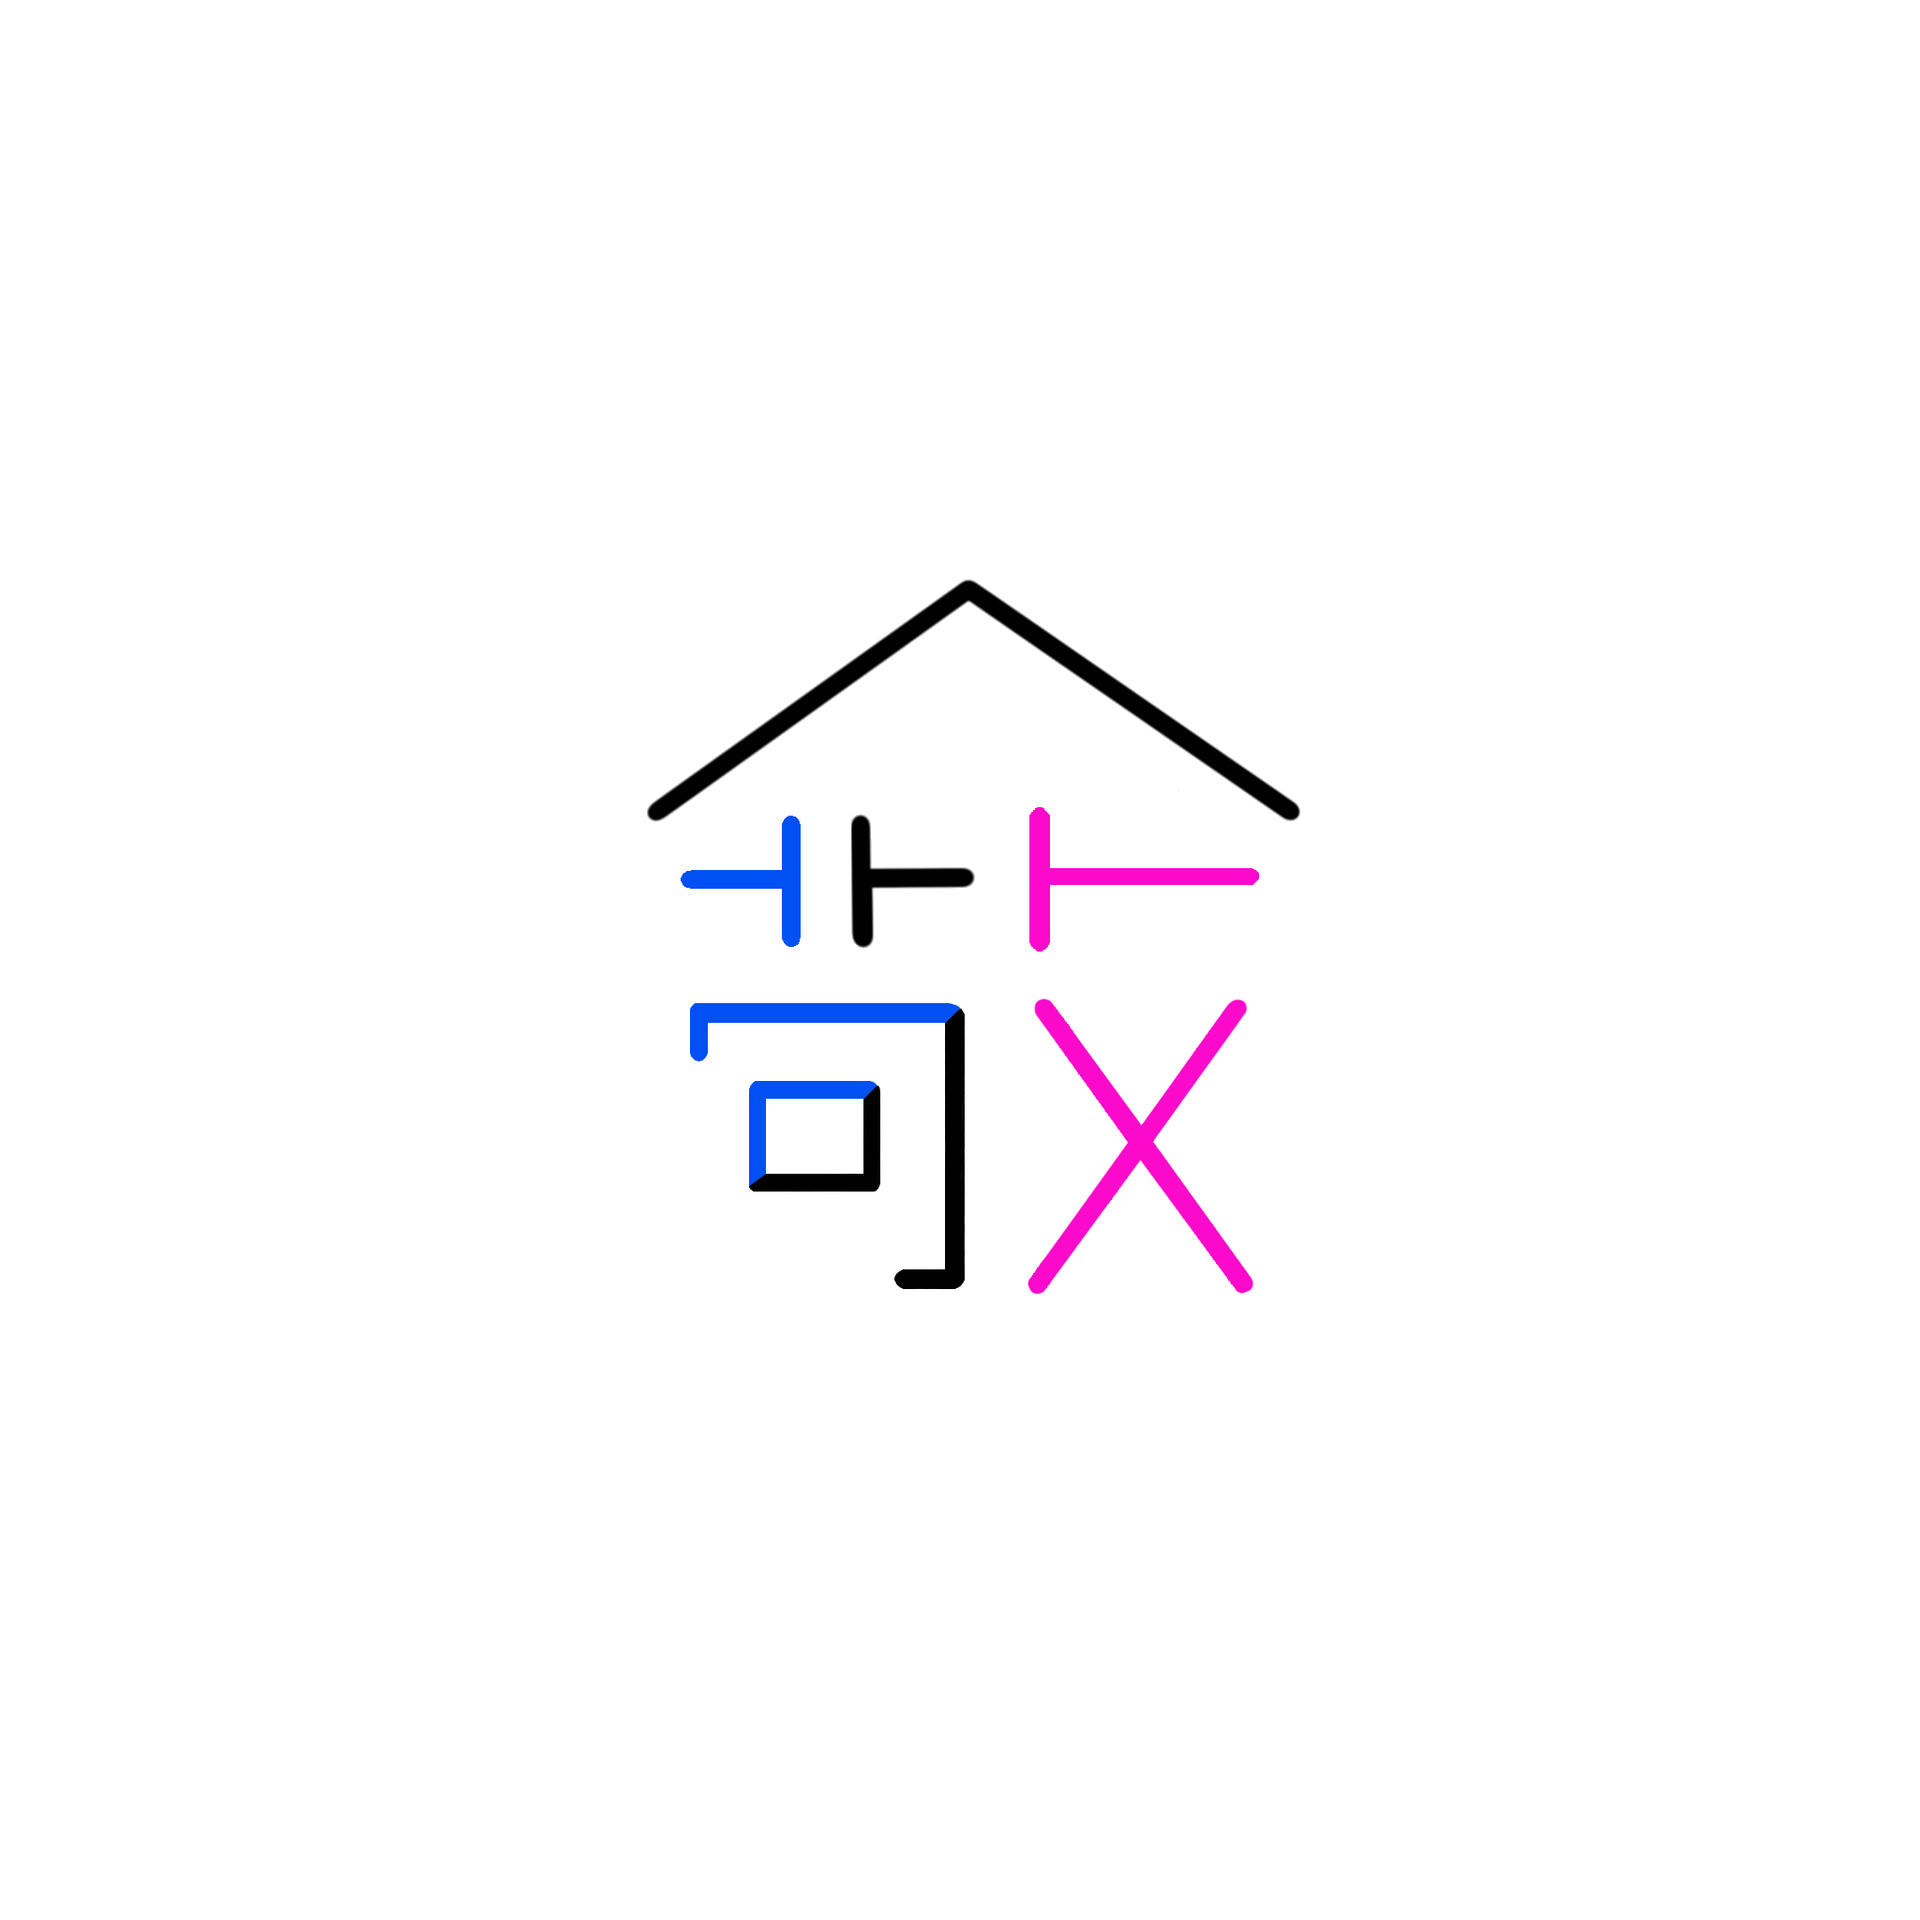 Adopting the Chinese character of "敬", which means be respectful, as the main part of the project logo to advocate for respecting seniors in the village, and to encourage the elderly to go out and participate social activities. The after-design community aims to let them feel at home in public spaces. 